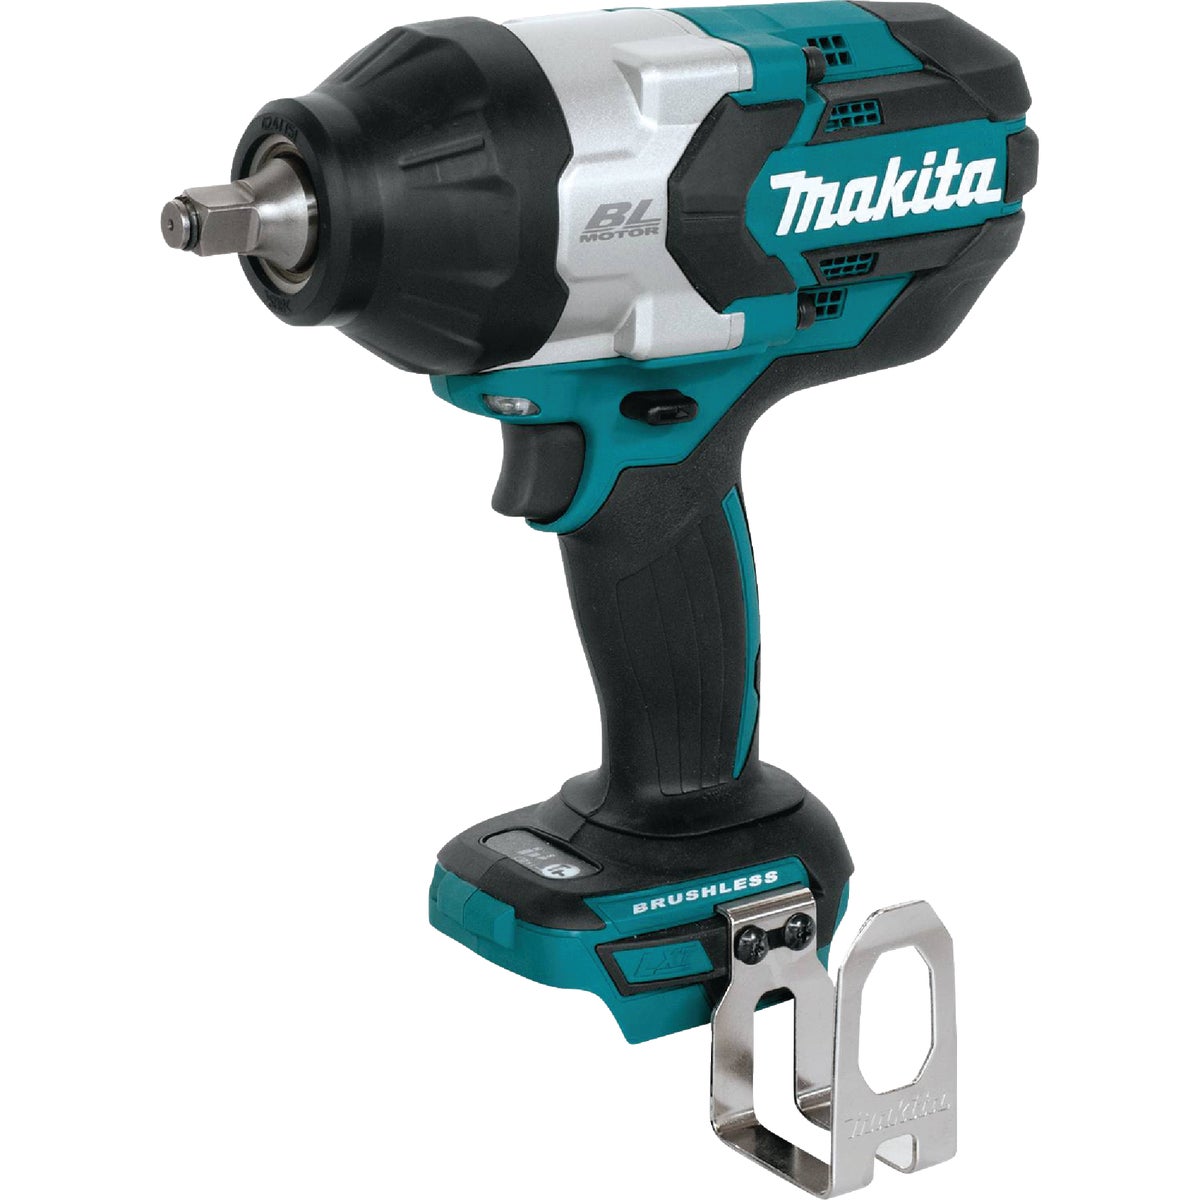 Makita 18 Volt LXT Lithium-Ion Brushless 1/2 In. High-Torque Cordless Impact Wrench (Tool Only)